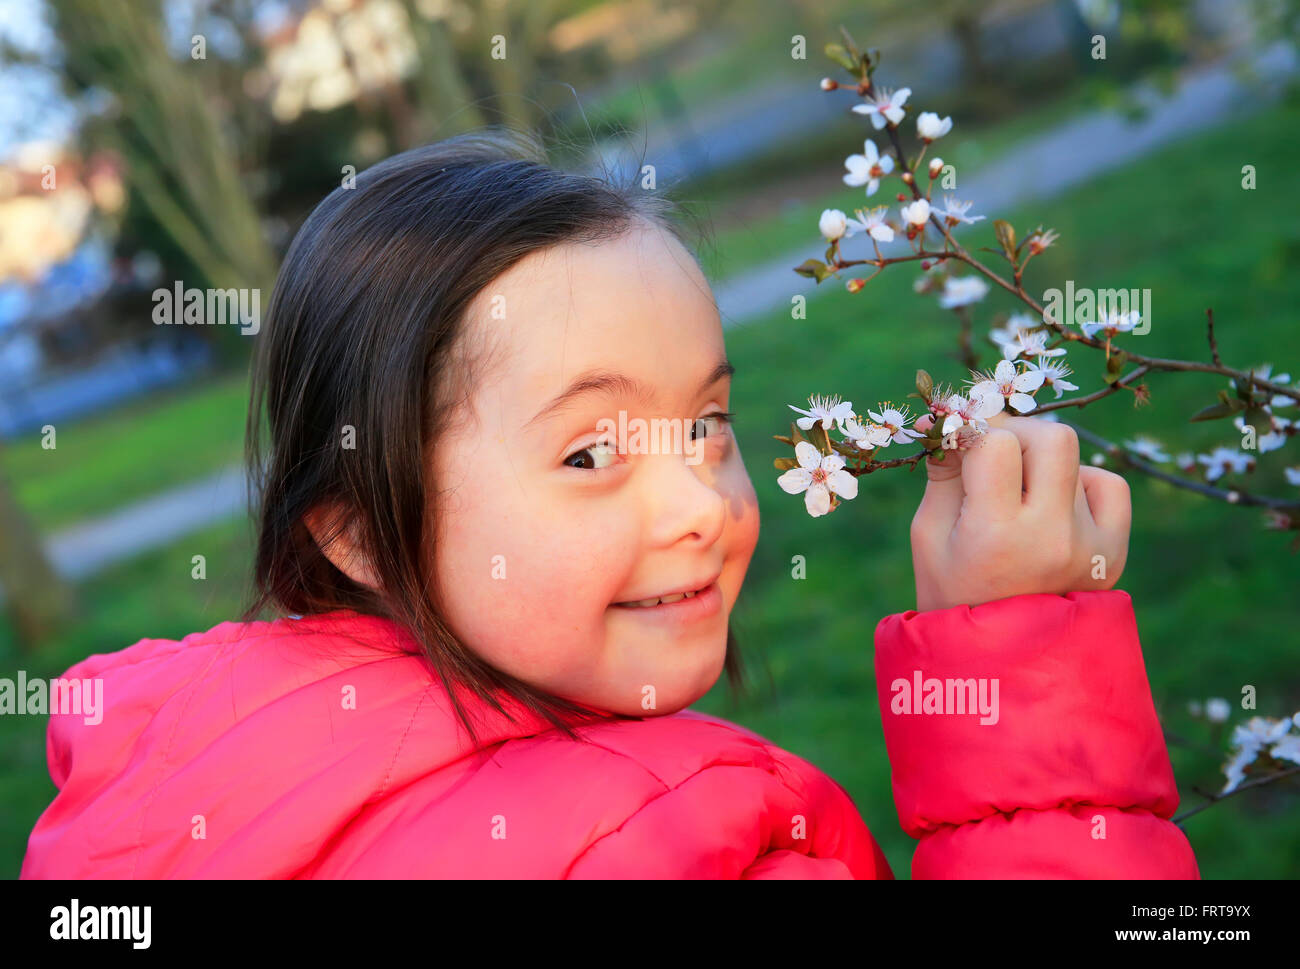 Little girl enjoy with the spring flowers branch Stock Photo